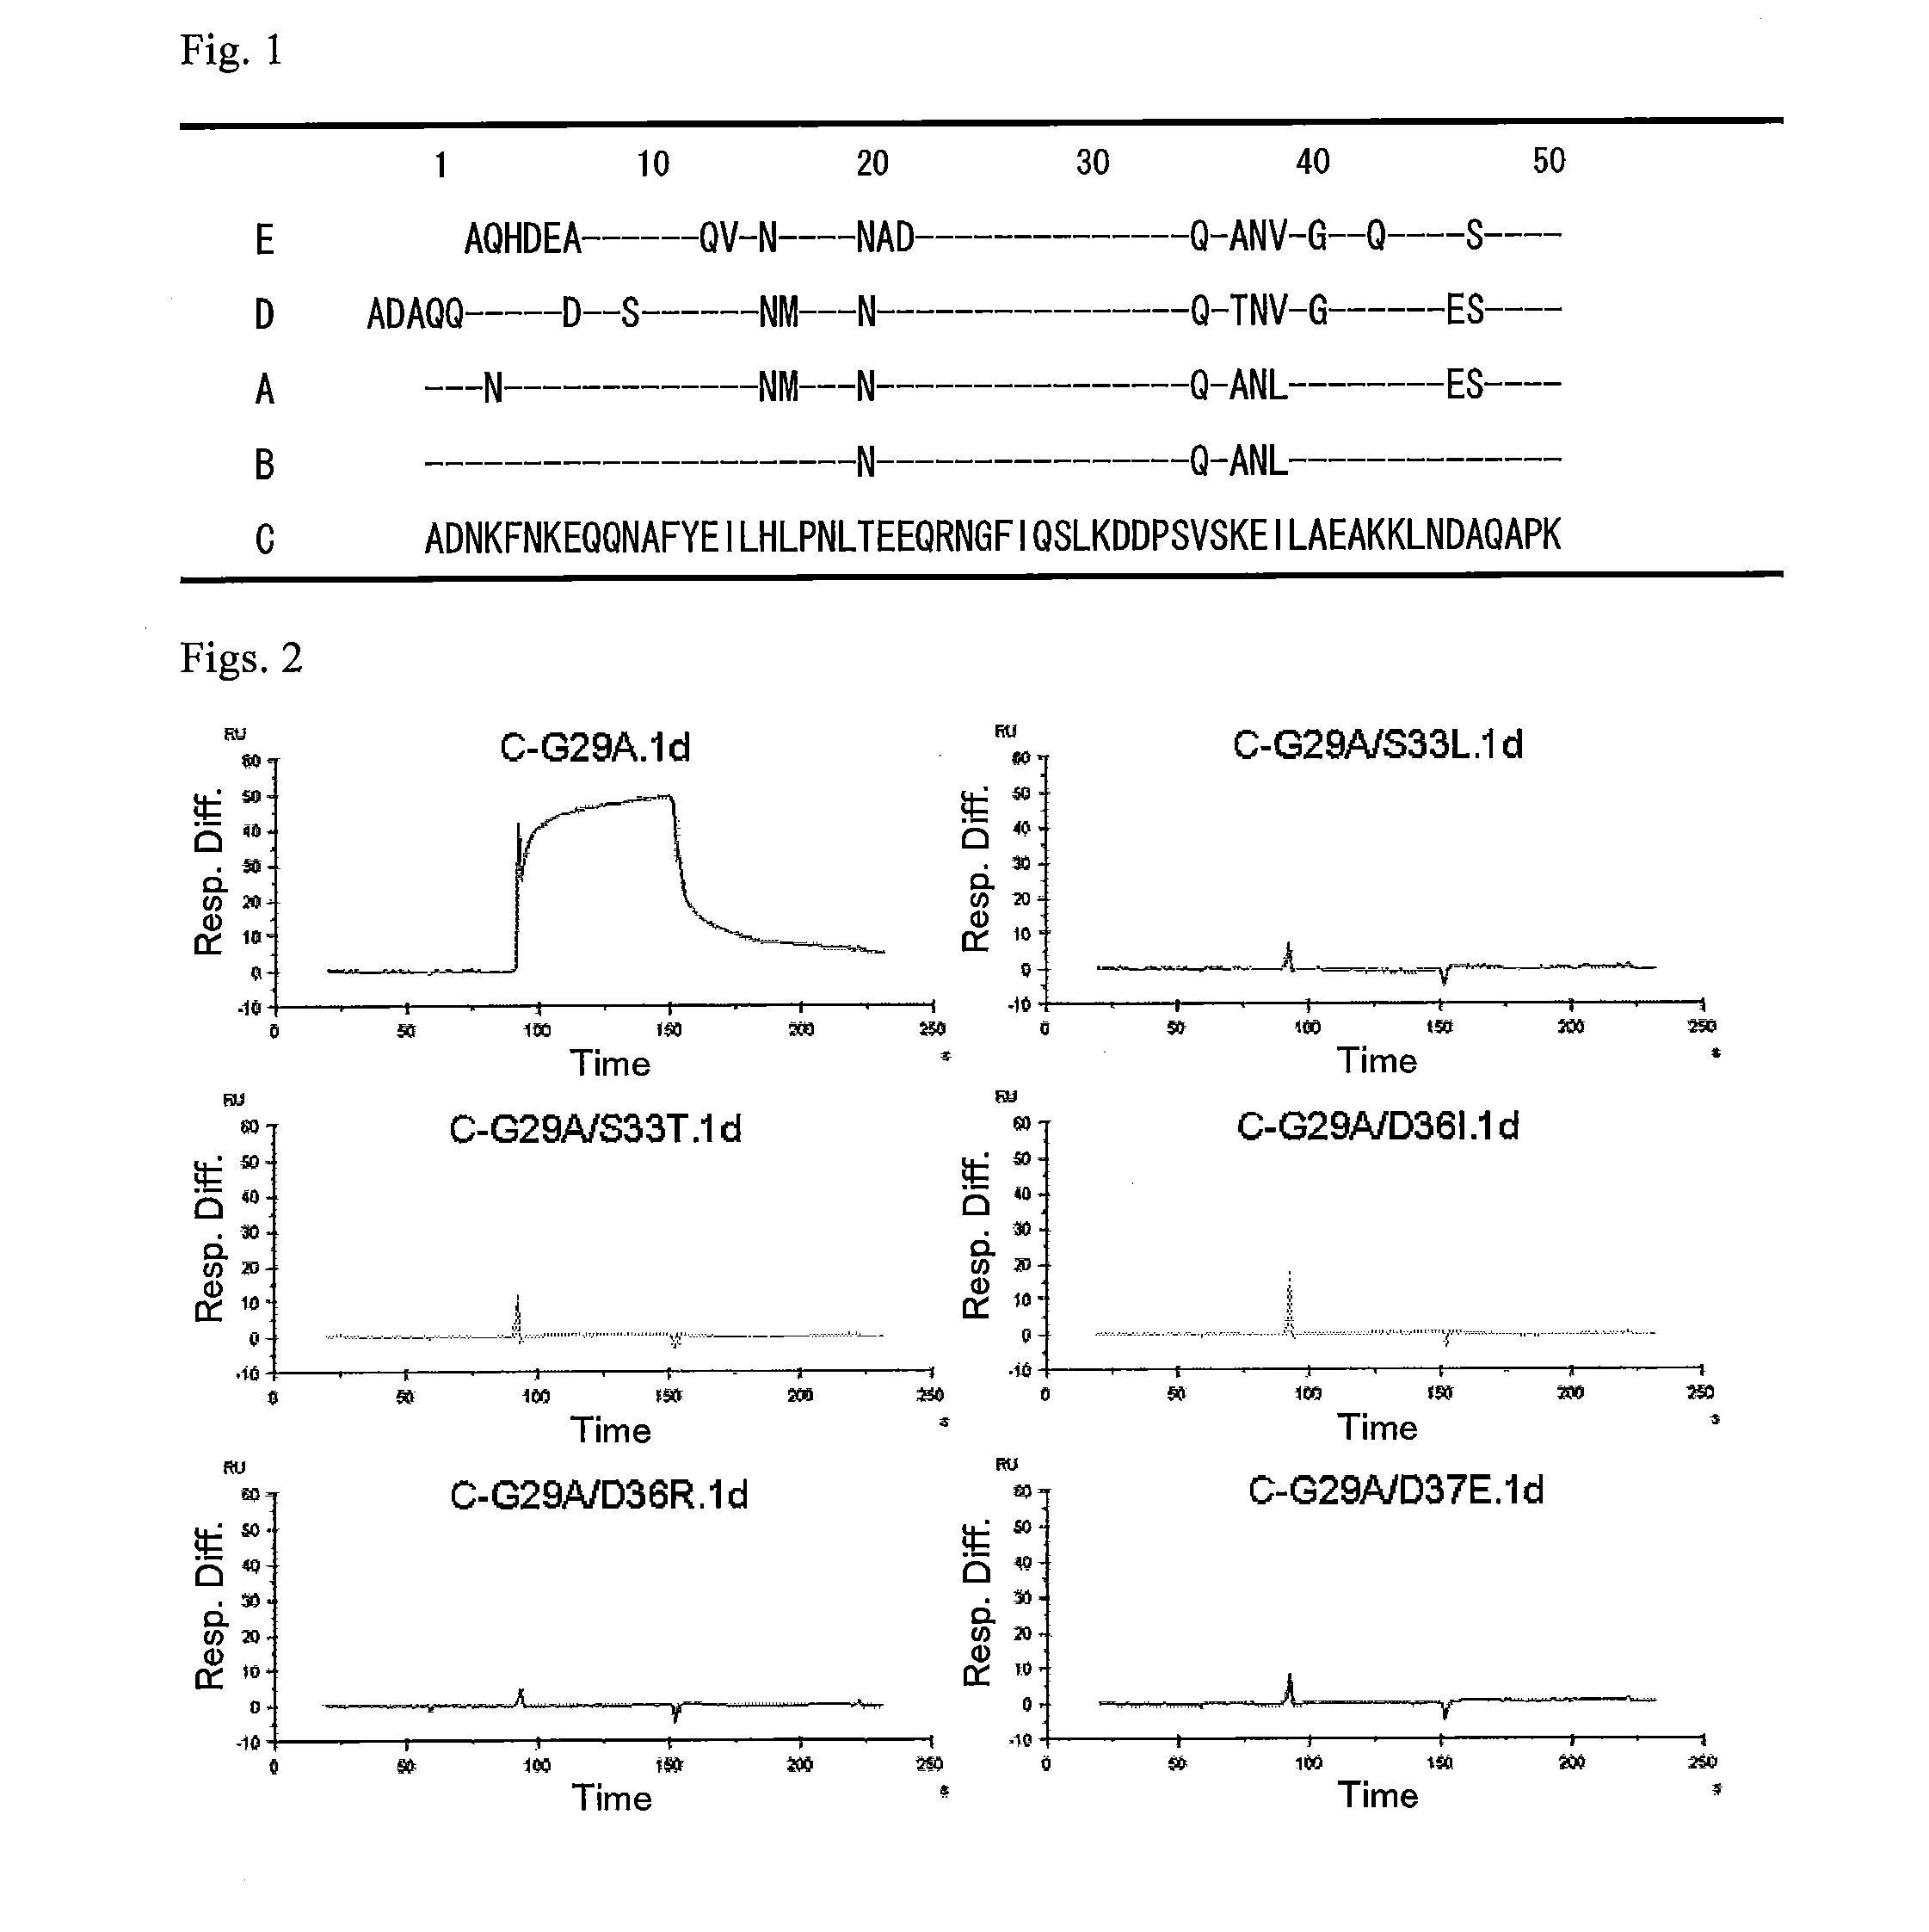 Protein capable of binding specifically to immunoglobulin, and immunoglobulin-binding affinity ligand